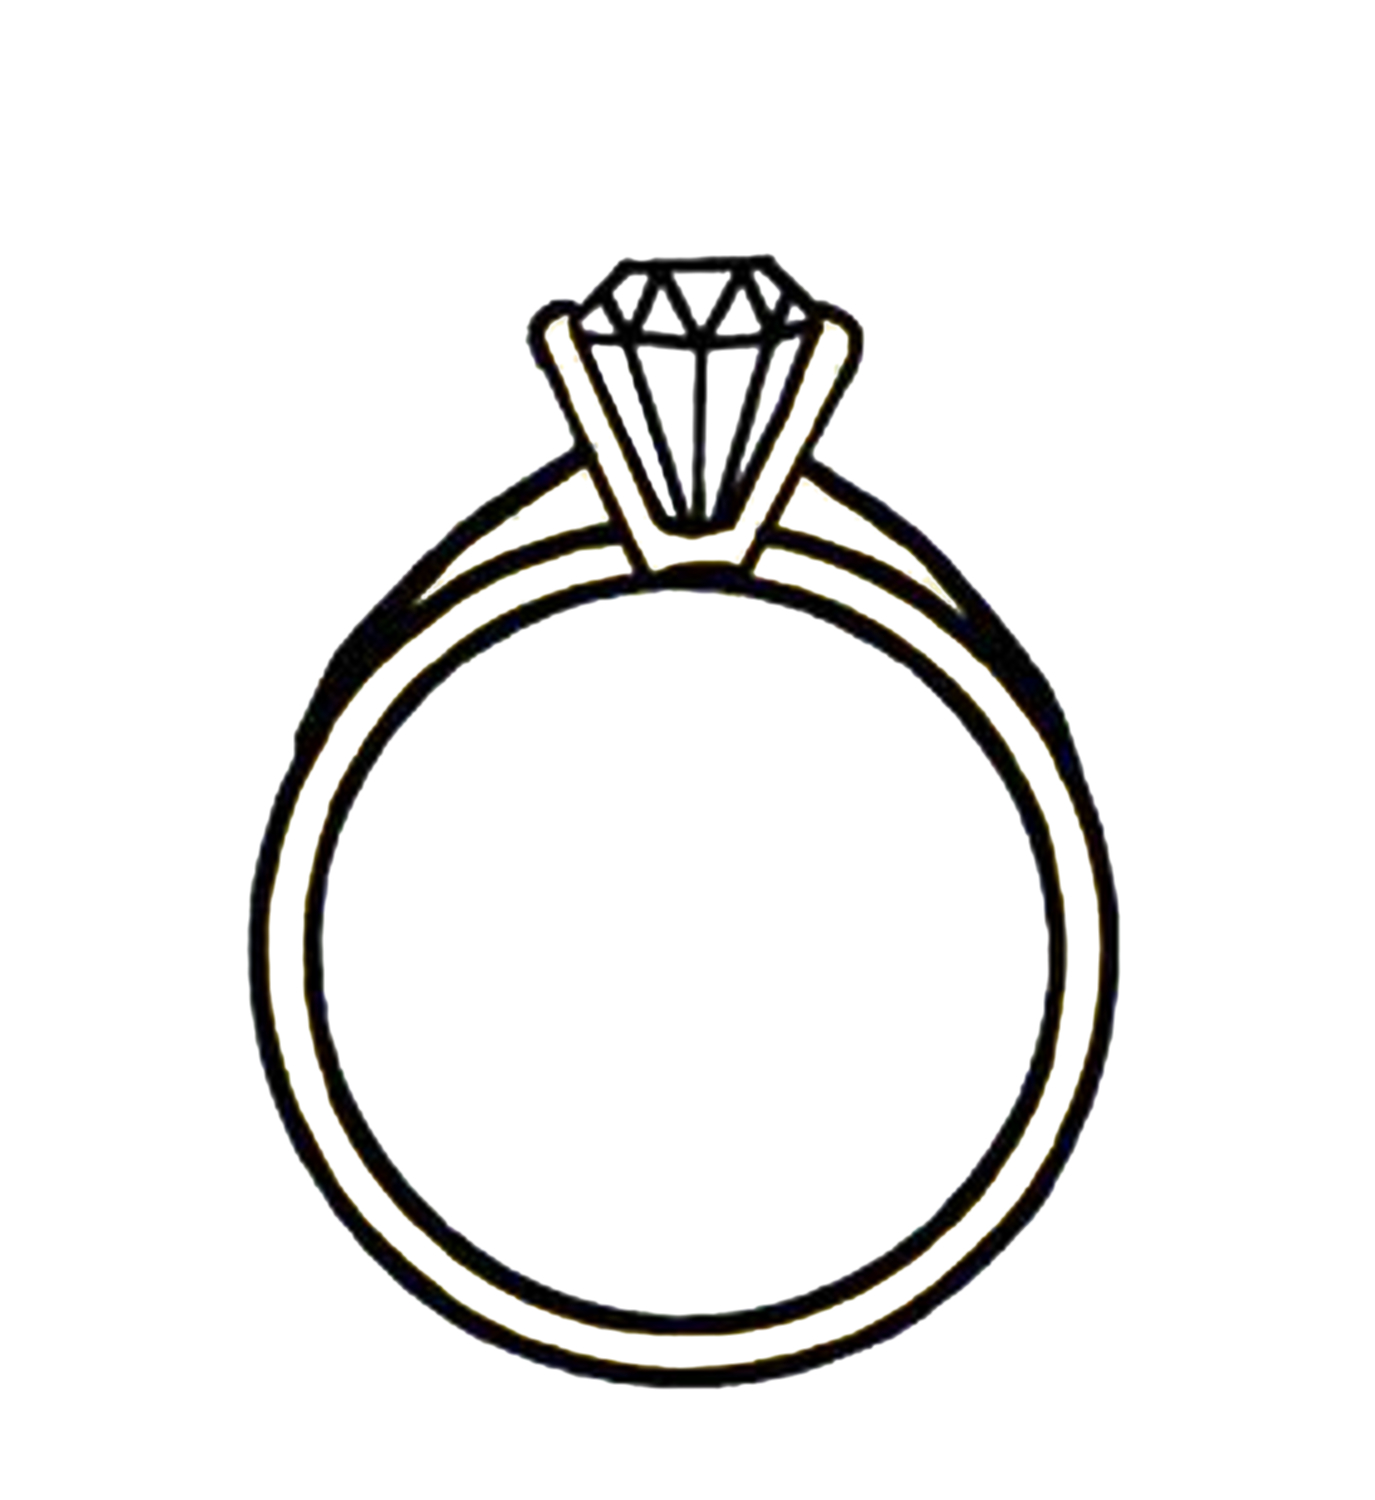 Engagement Ring Clipart | Clipart Panda - Free Clipart Images